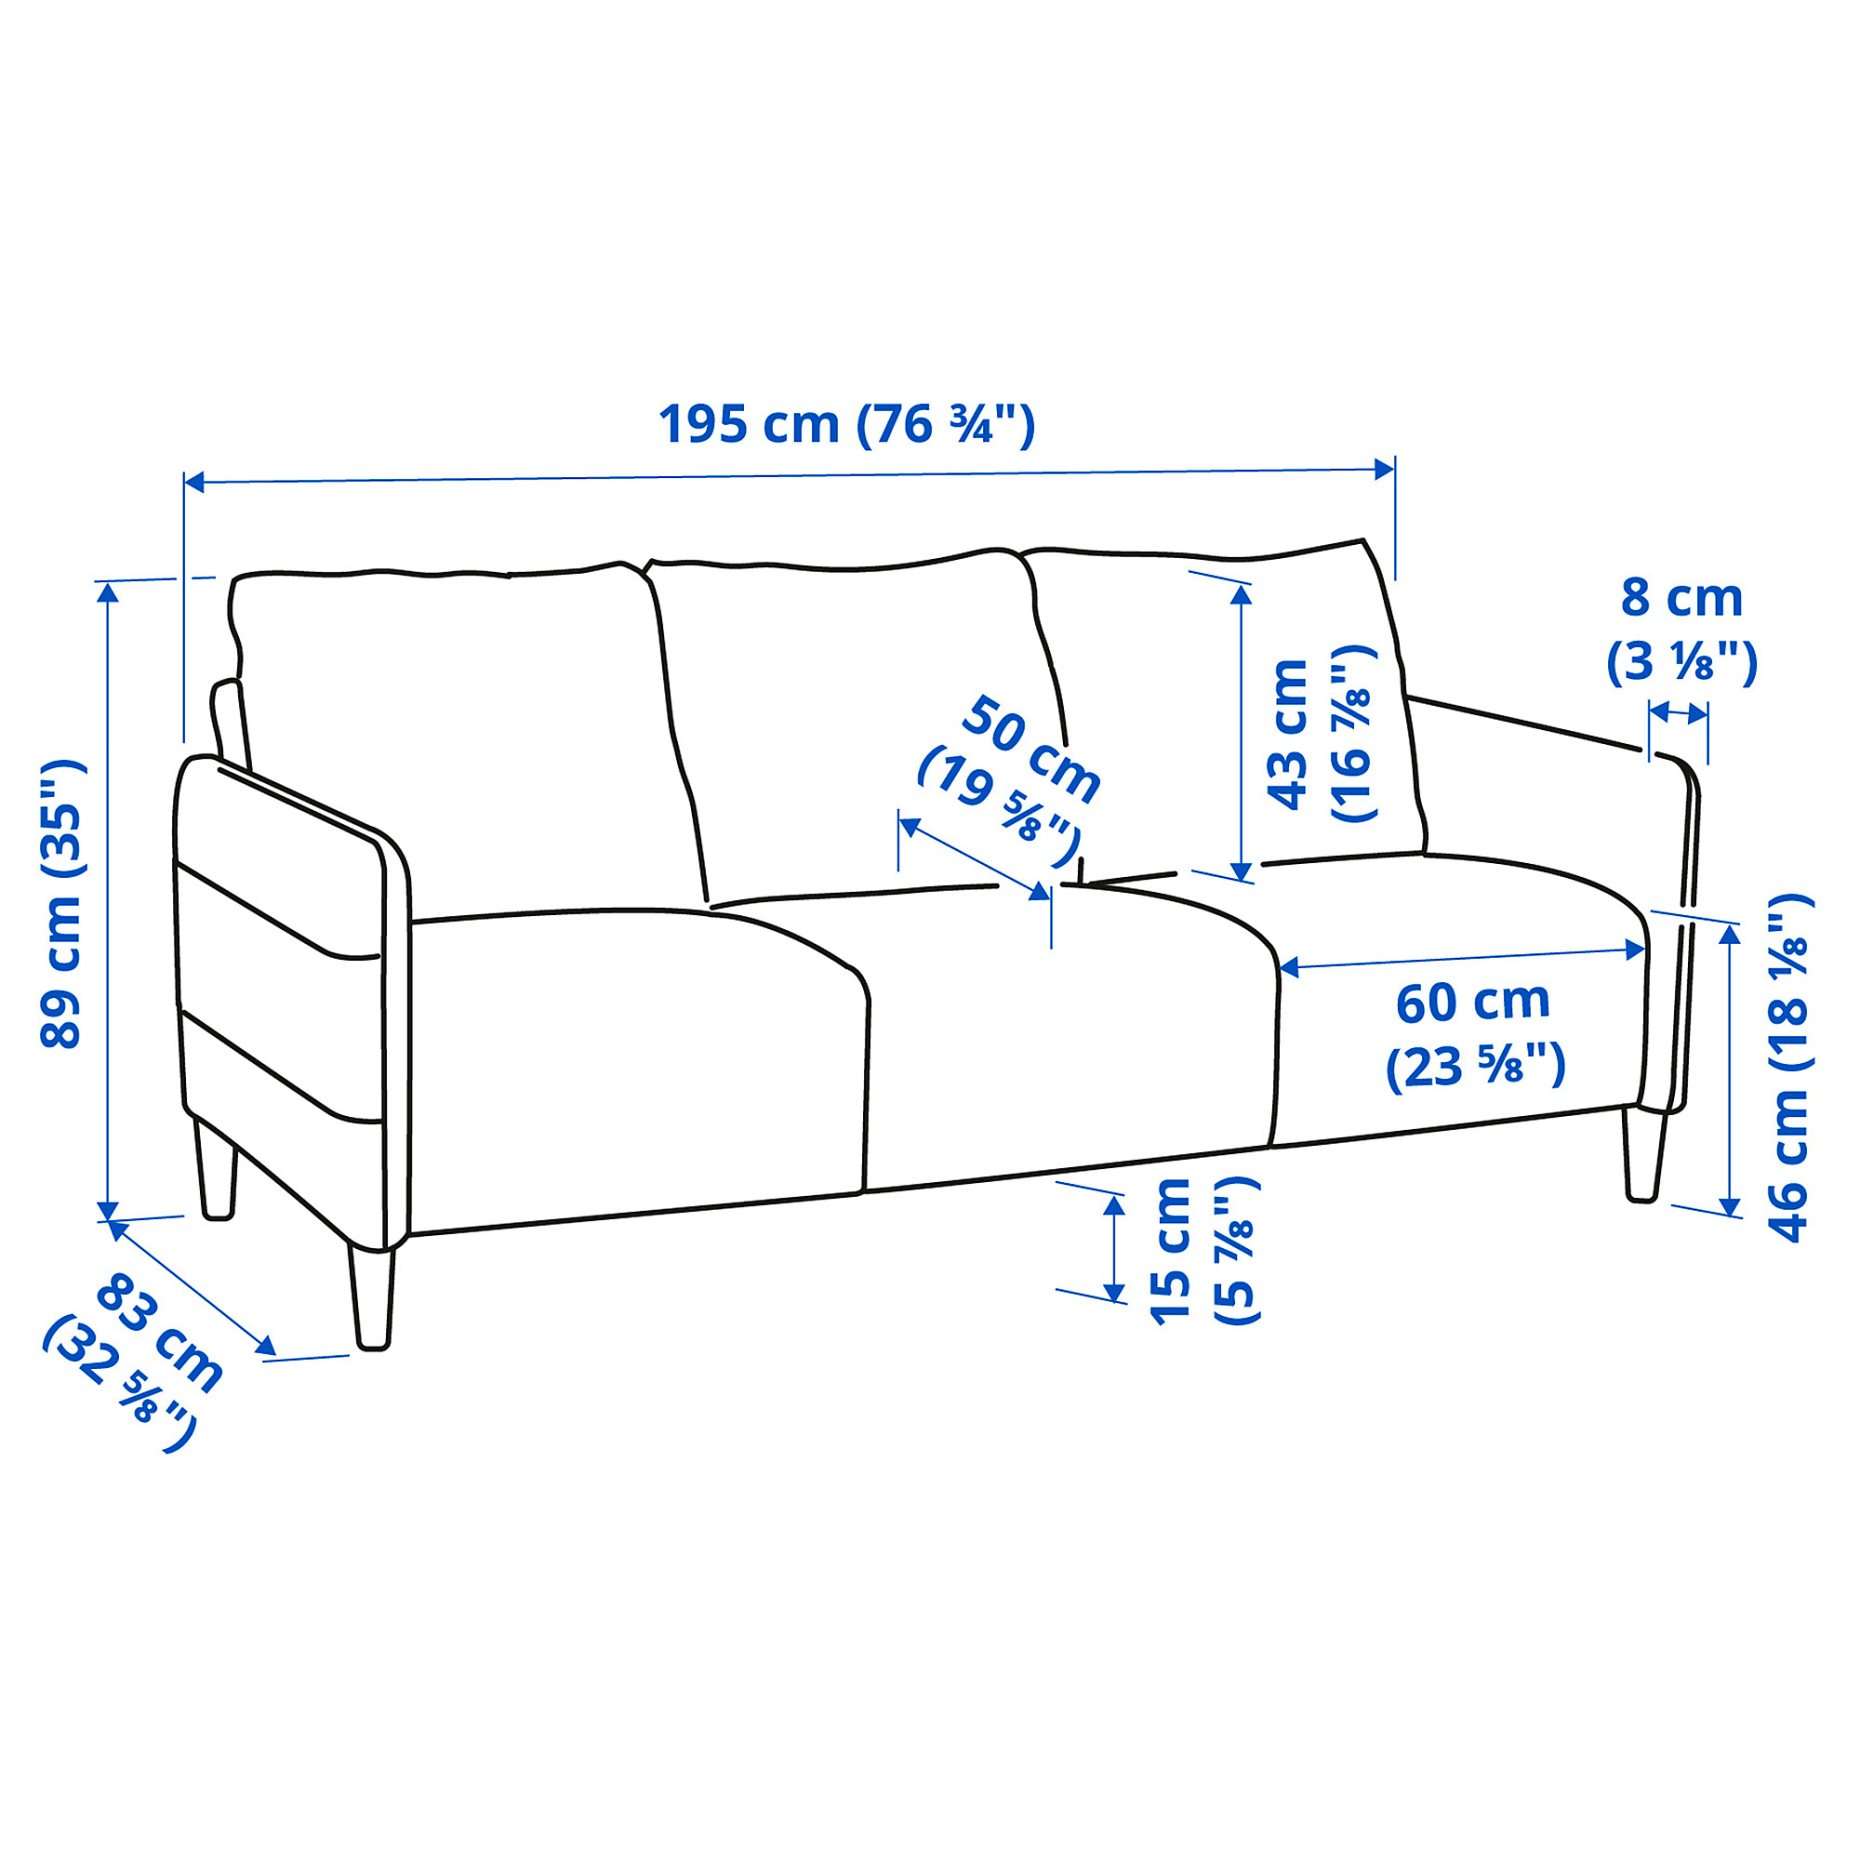 ANGERSBY, 3-seat sofa, 904.990.66